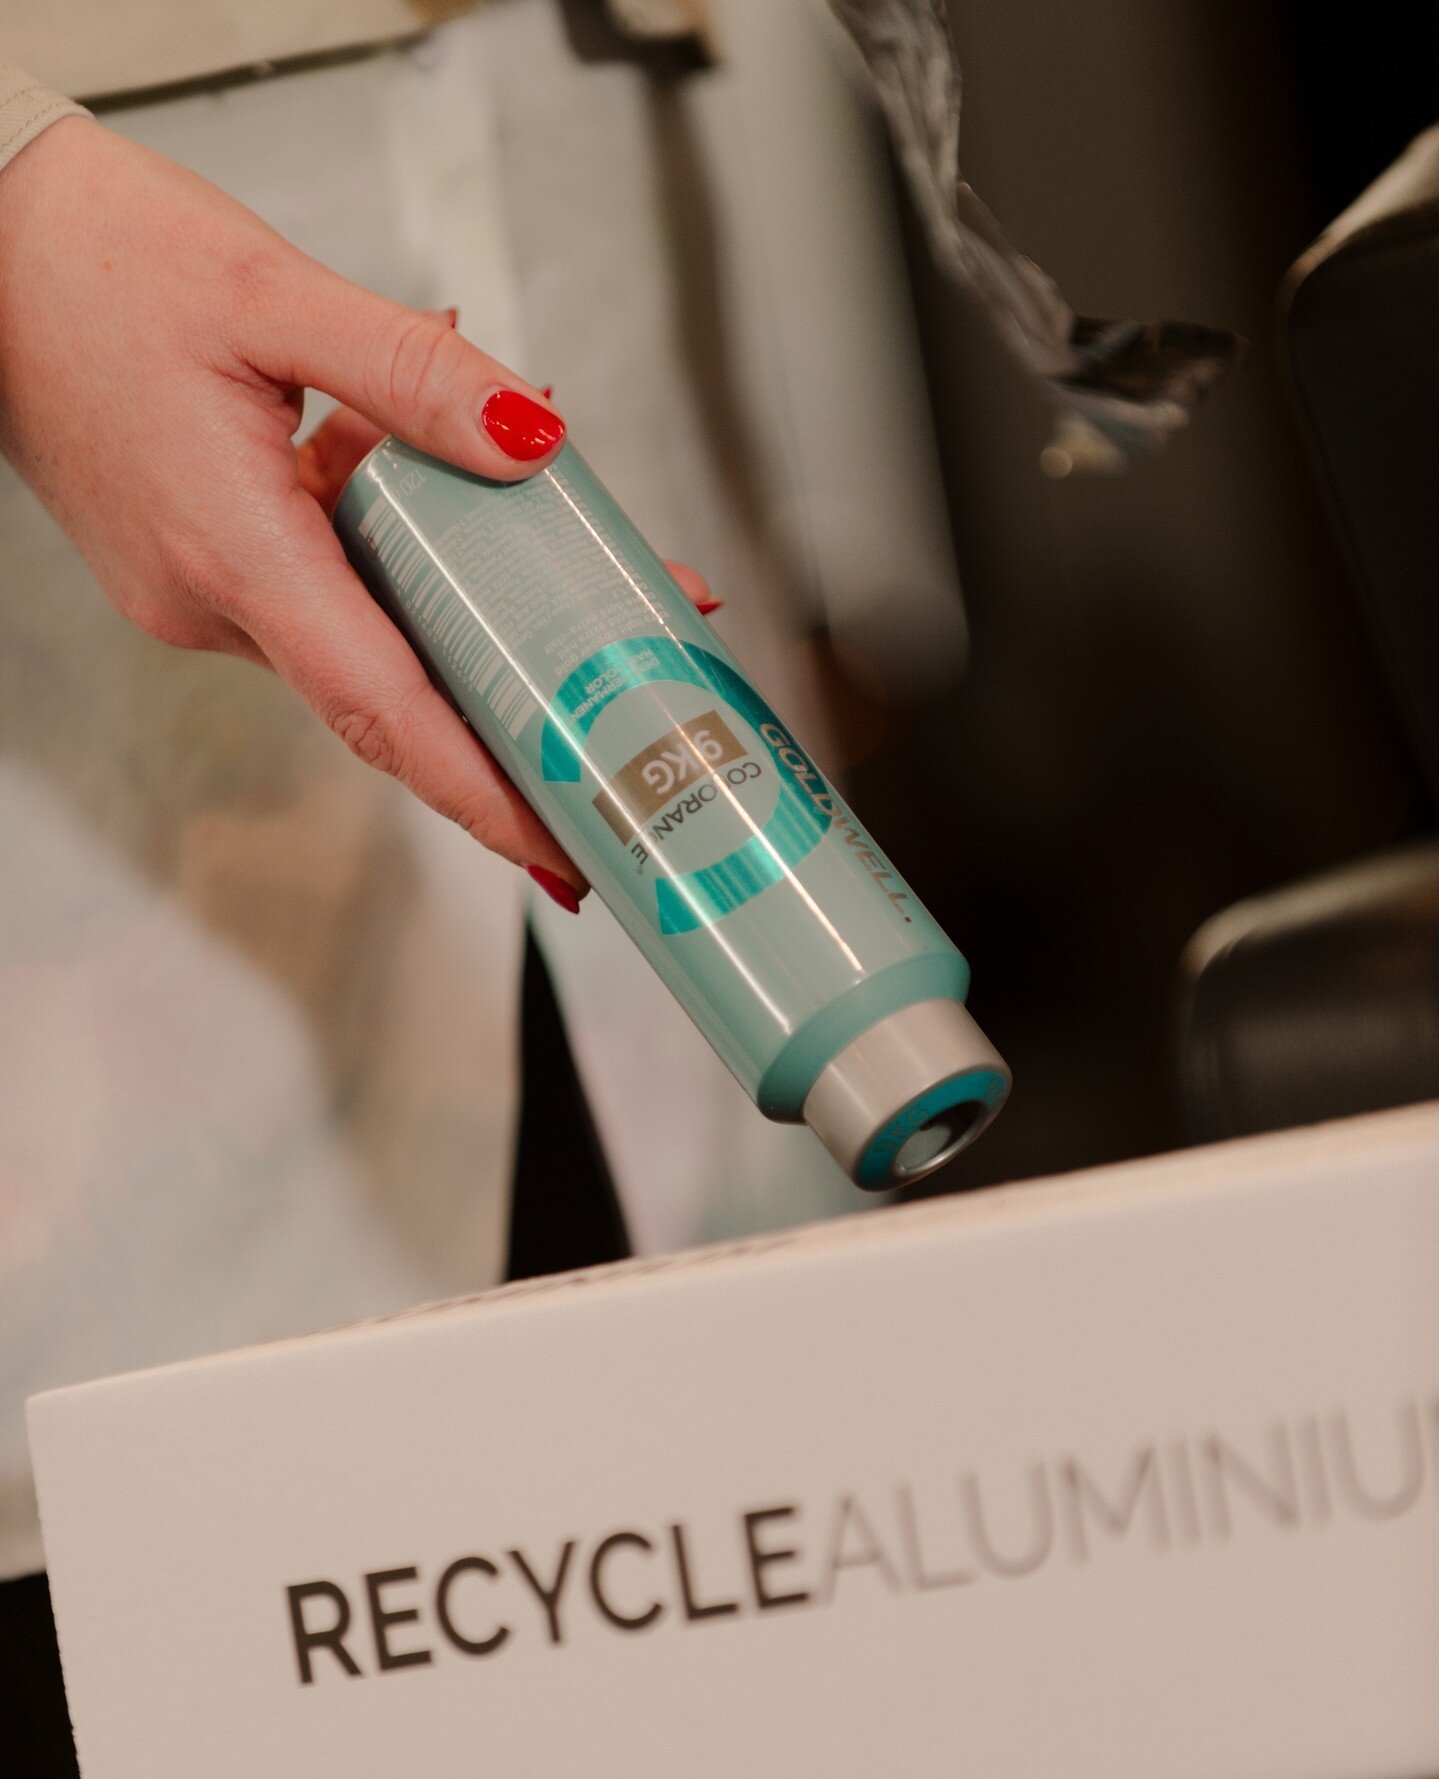 Think you&rsquo;re too busy to recycle? Think again! ♻️⁠
⁠
Recycle My Salon makes recycling quick &amp; easy, allowing you to get on with business 💸⁠
.⁠
.⁠
.⁠
.⁠
#recyclemysalon #recycling #sustainablefashion #haircareuk #sustainableliving #ukhairdr